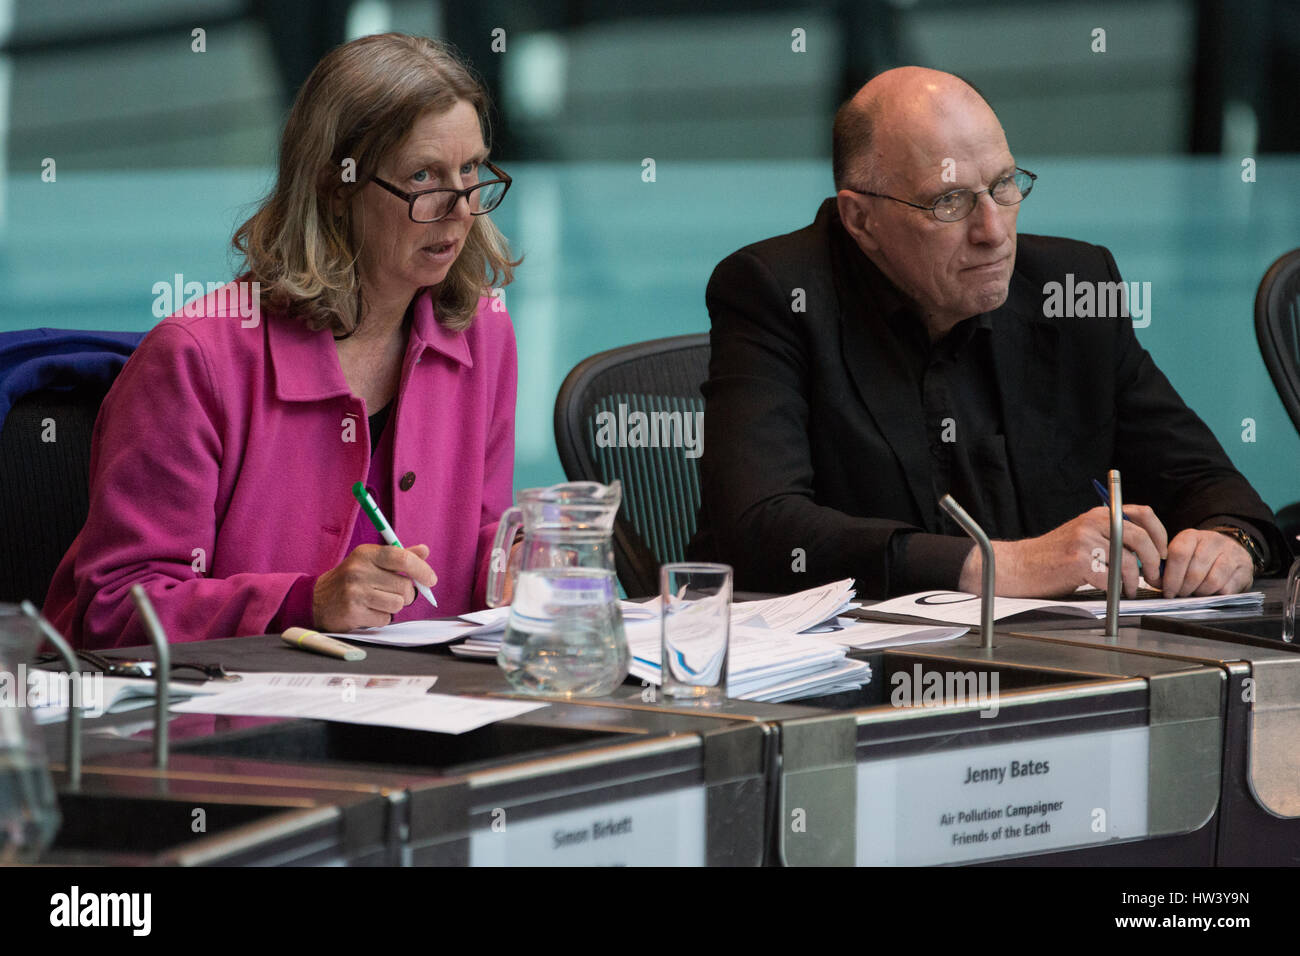 London, UK. 16th March, 2017. Jenny Bates, London Campaigner at Friends of the Earth, addresses the London Assembly Environment Committee during a debate on Heathrow expansion in the Chamber at City Hall. Credit: Mark Kerrison/Alamy Live News Stock Photo